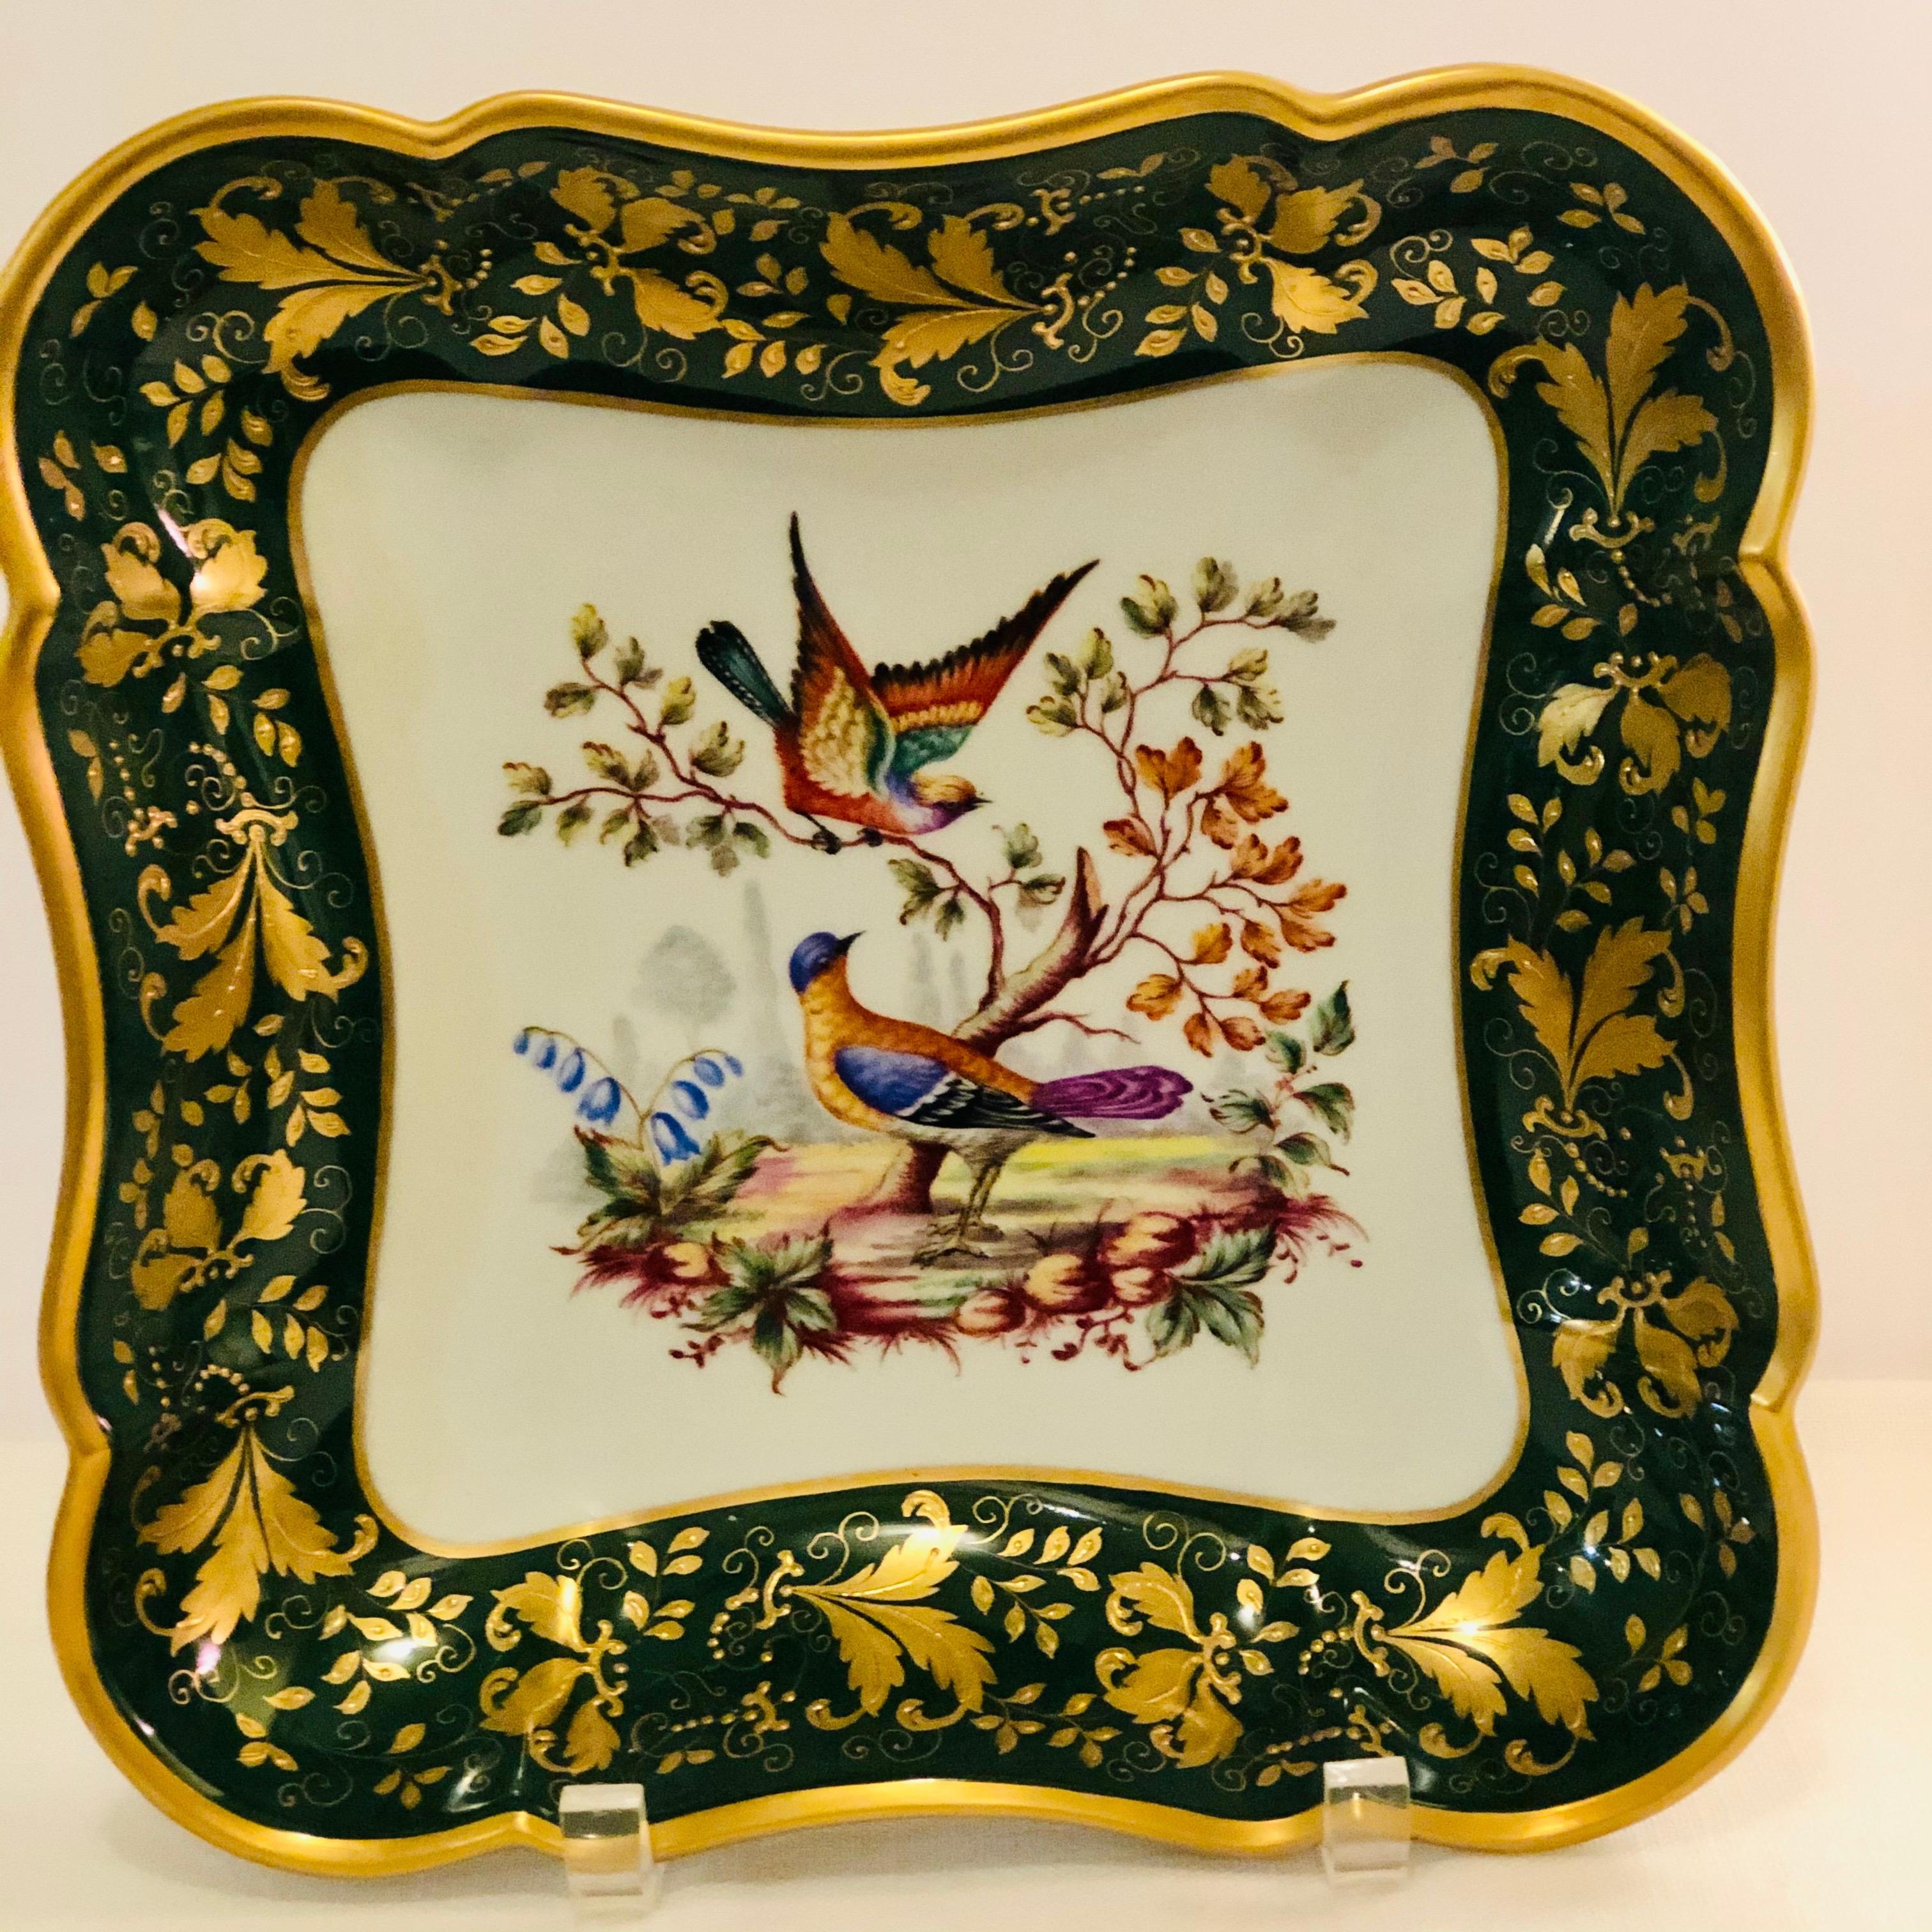 This is a fabulous Le Tallec bowl hand-painted beautifully with two colorful birds in their natural habitat. The emerald green border is embellished with raised gilded leaves and gilded jewels. This bowl would be a stunning eye catching addition to